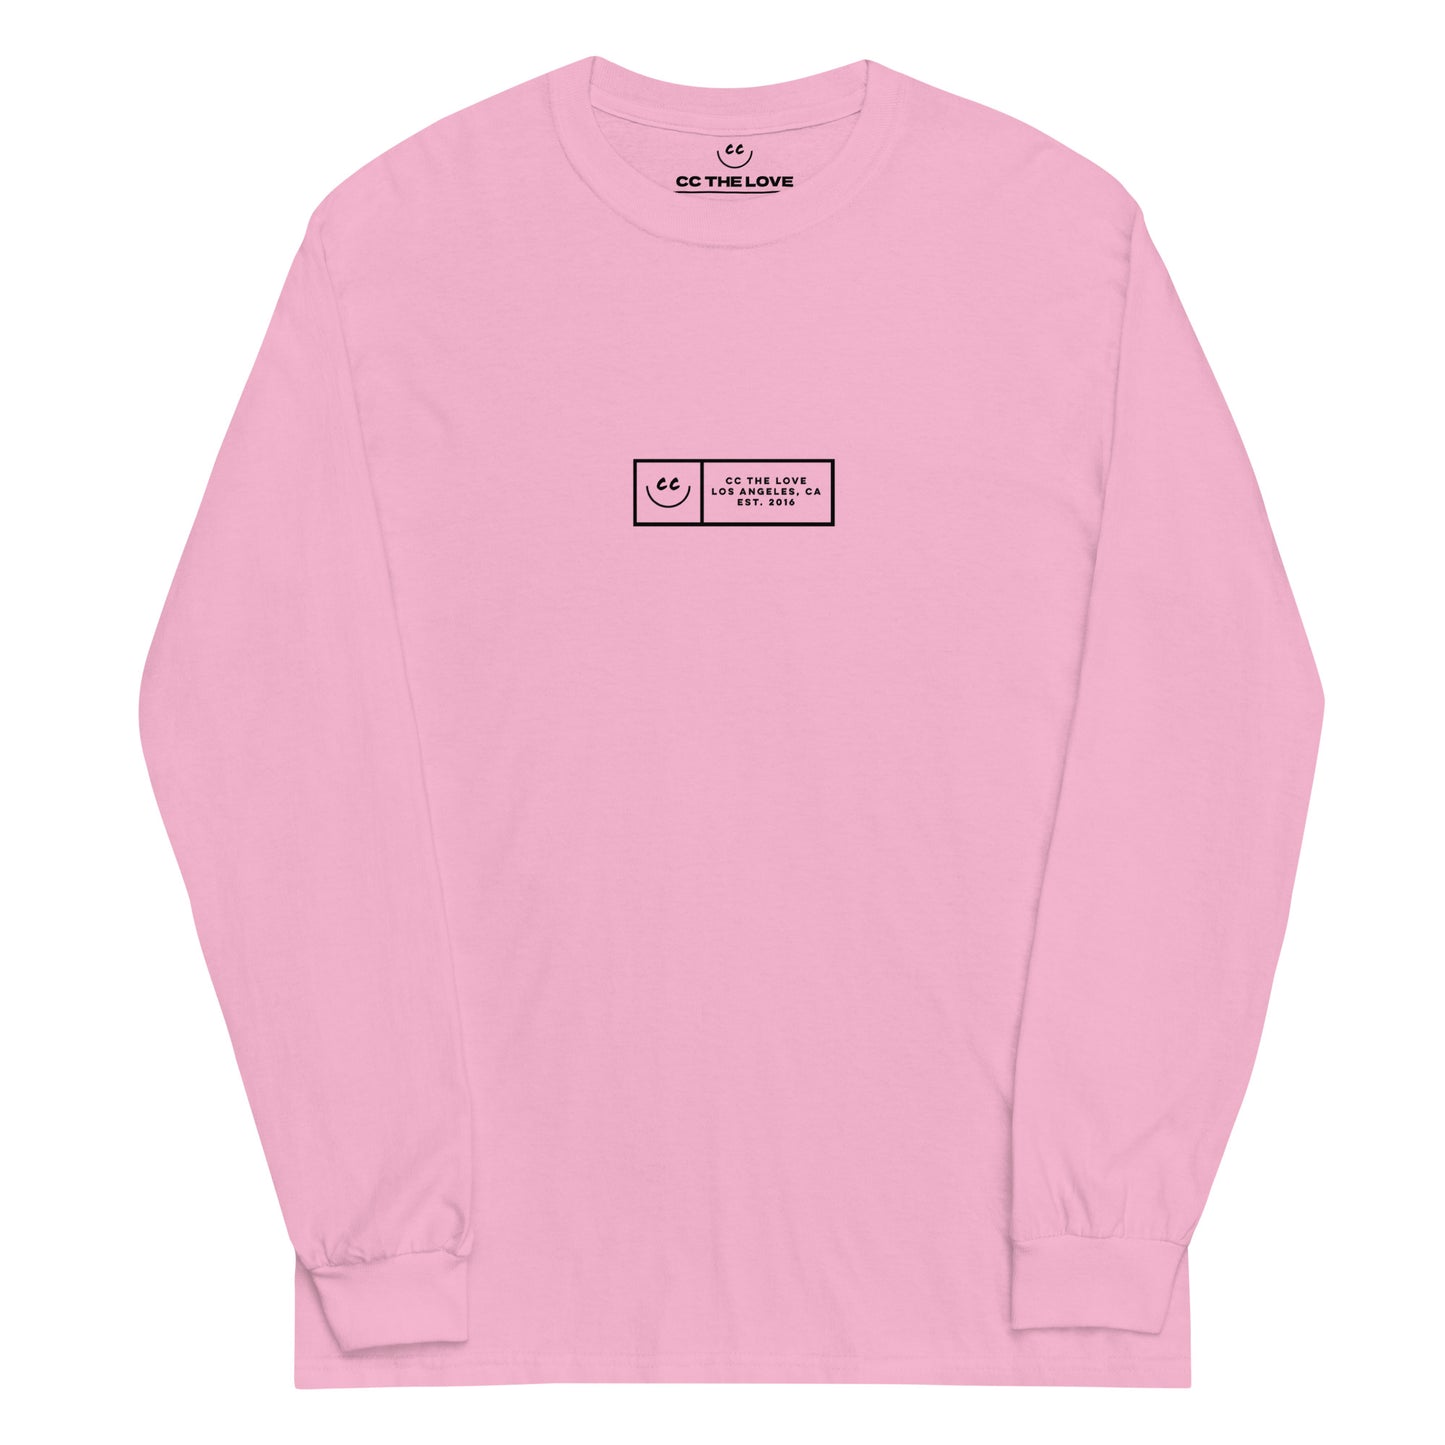 Boxed Smile Tee in Pink - Long Sleeve